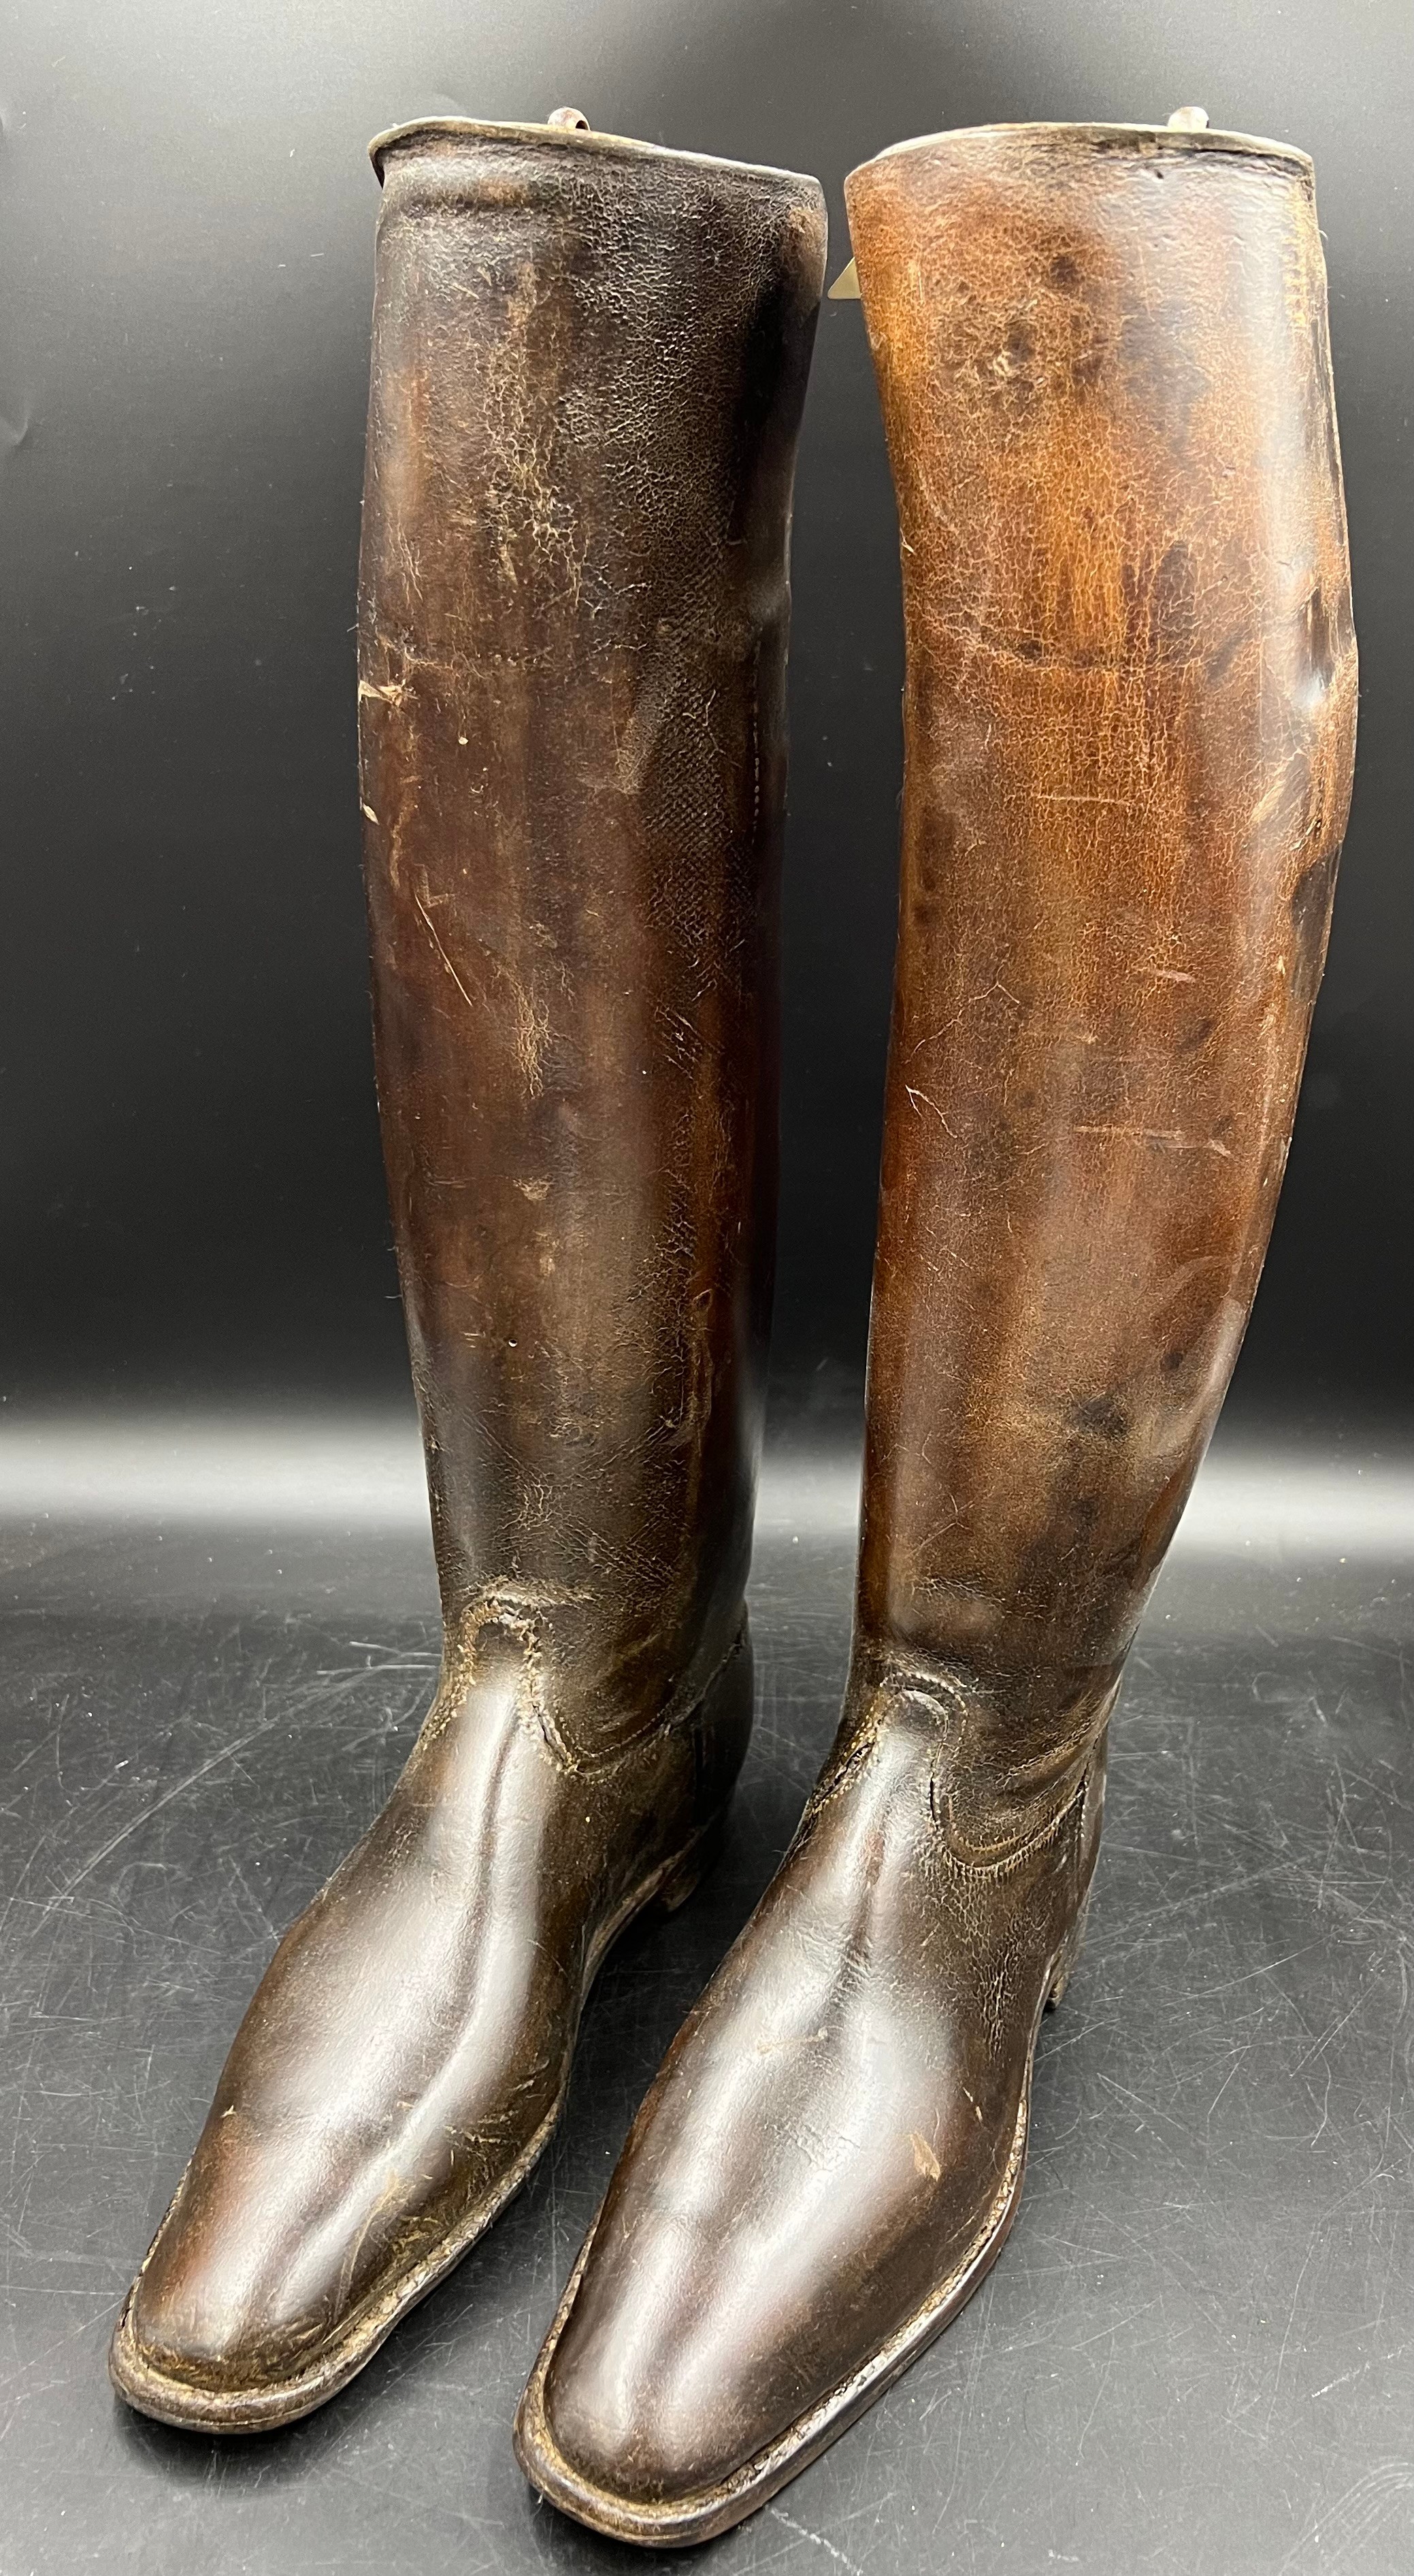 Vintage French leather riding boots complete with wooden trees.